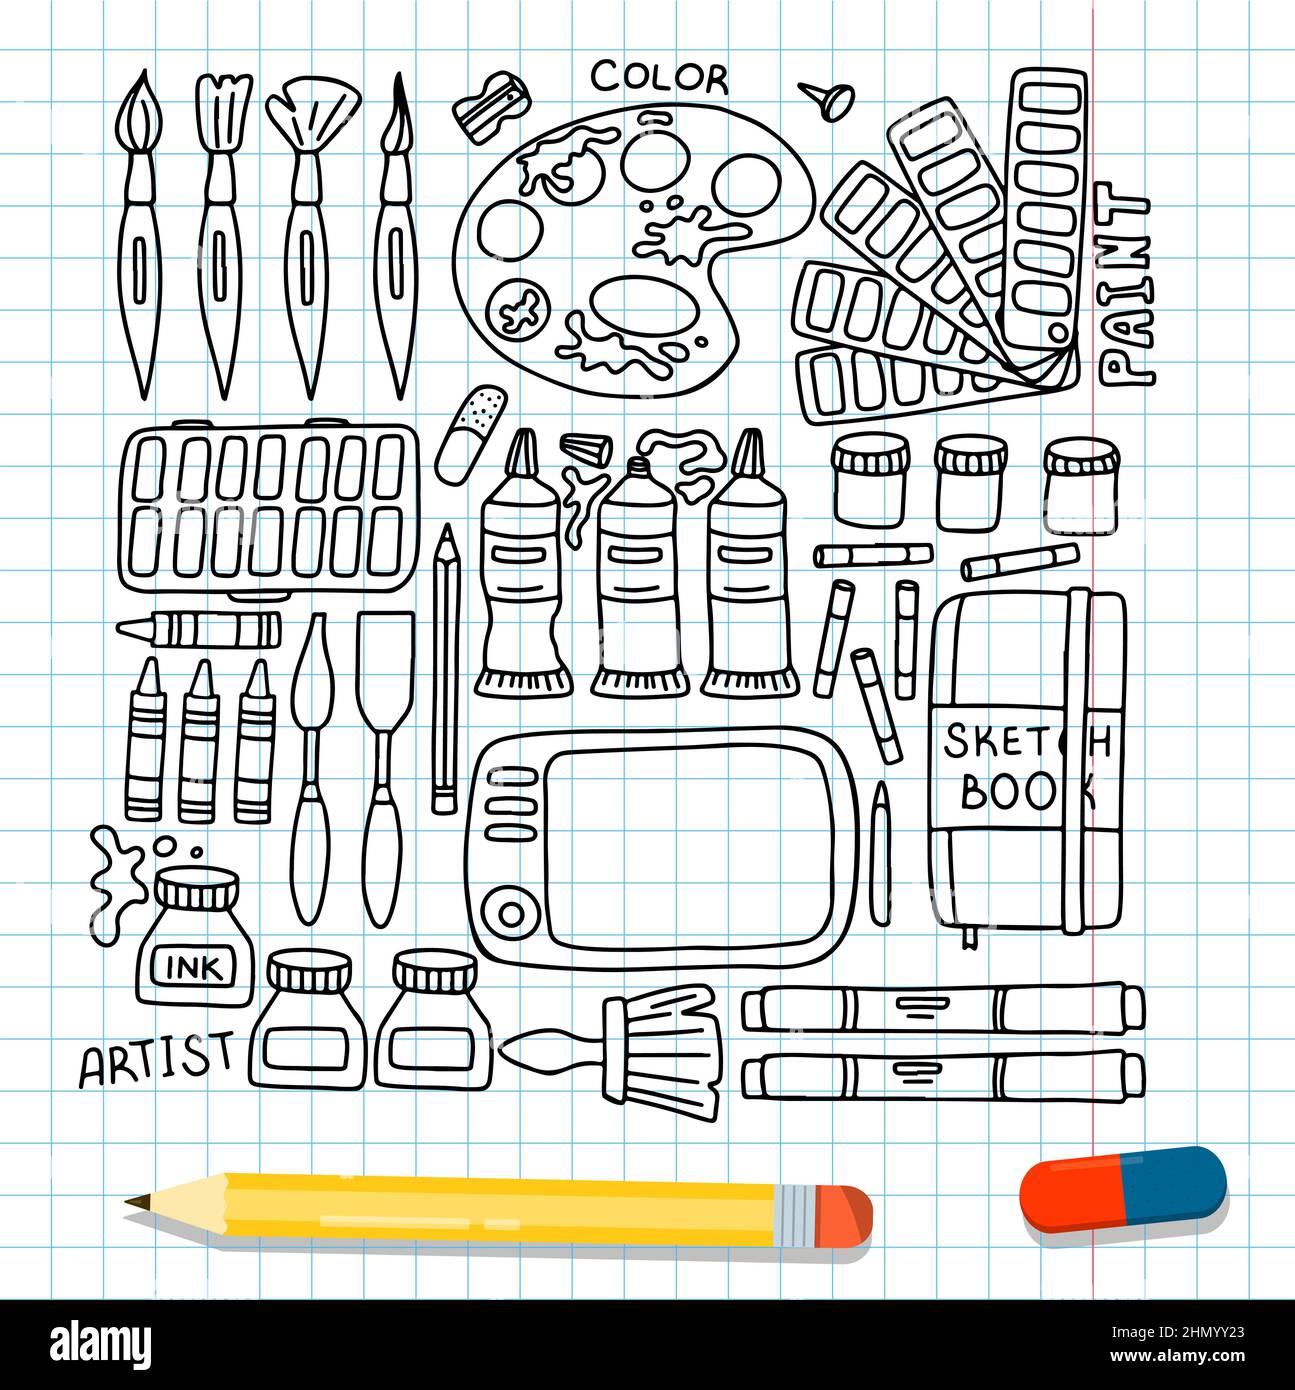 https://c8.alamy.com/comp/2HMYY23/vector-art-tools-sketch-set-hand-drawn-vector-artist-s-supplies-doodle-graphic-tablet-markers-and-paints-art-background-2HMYY23.jpg